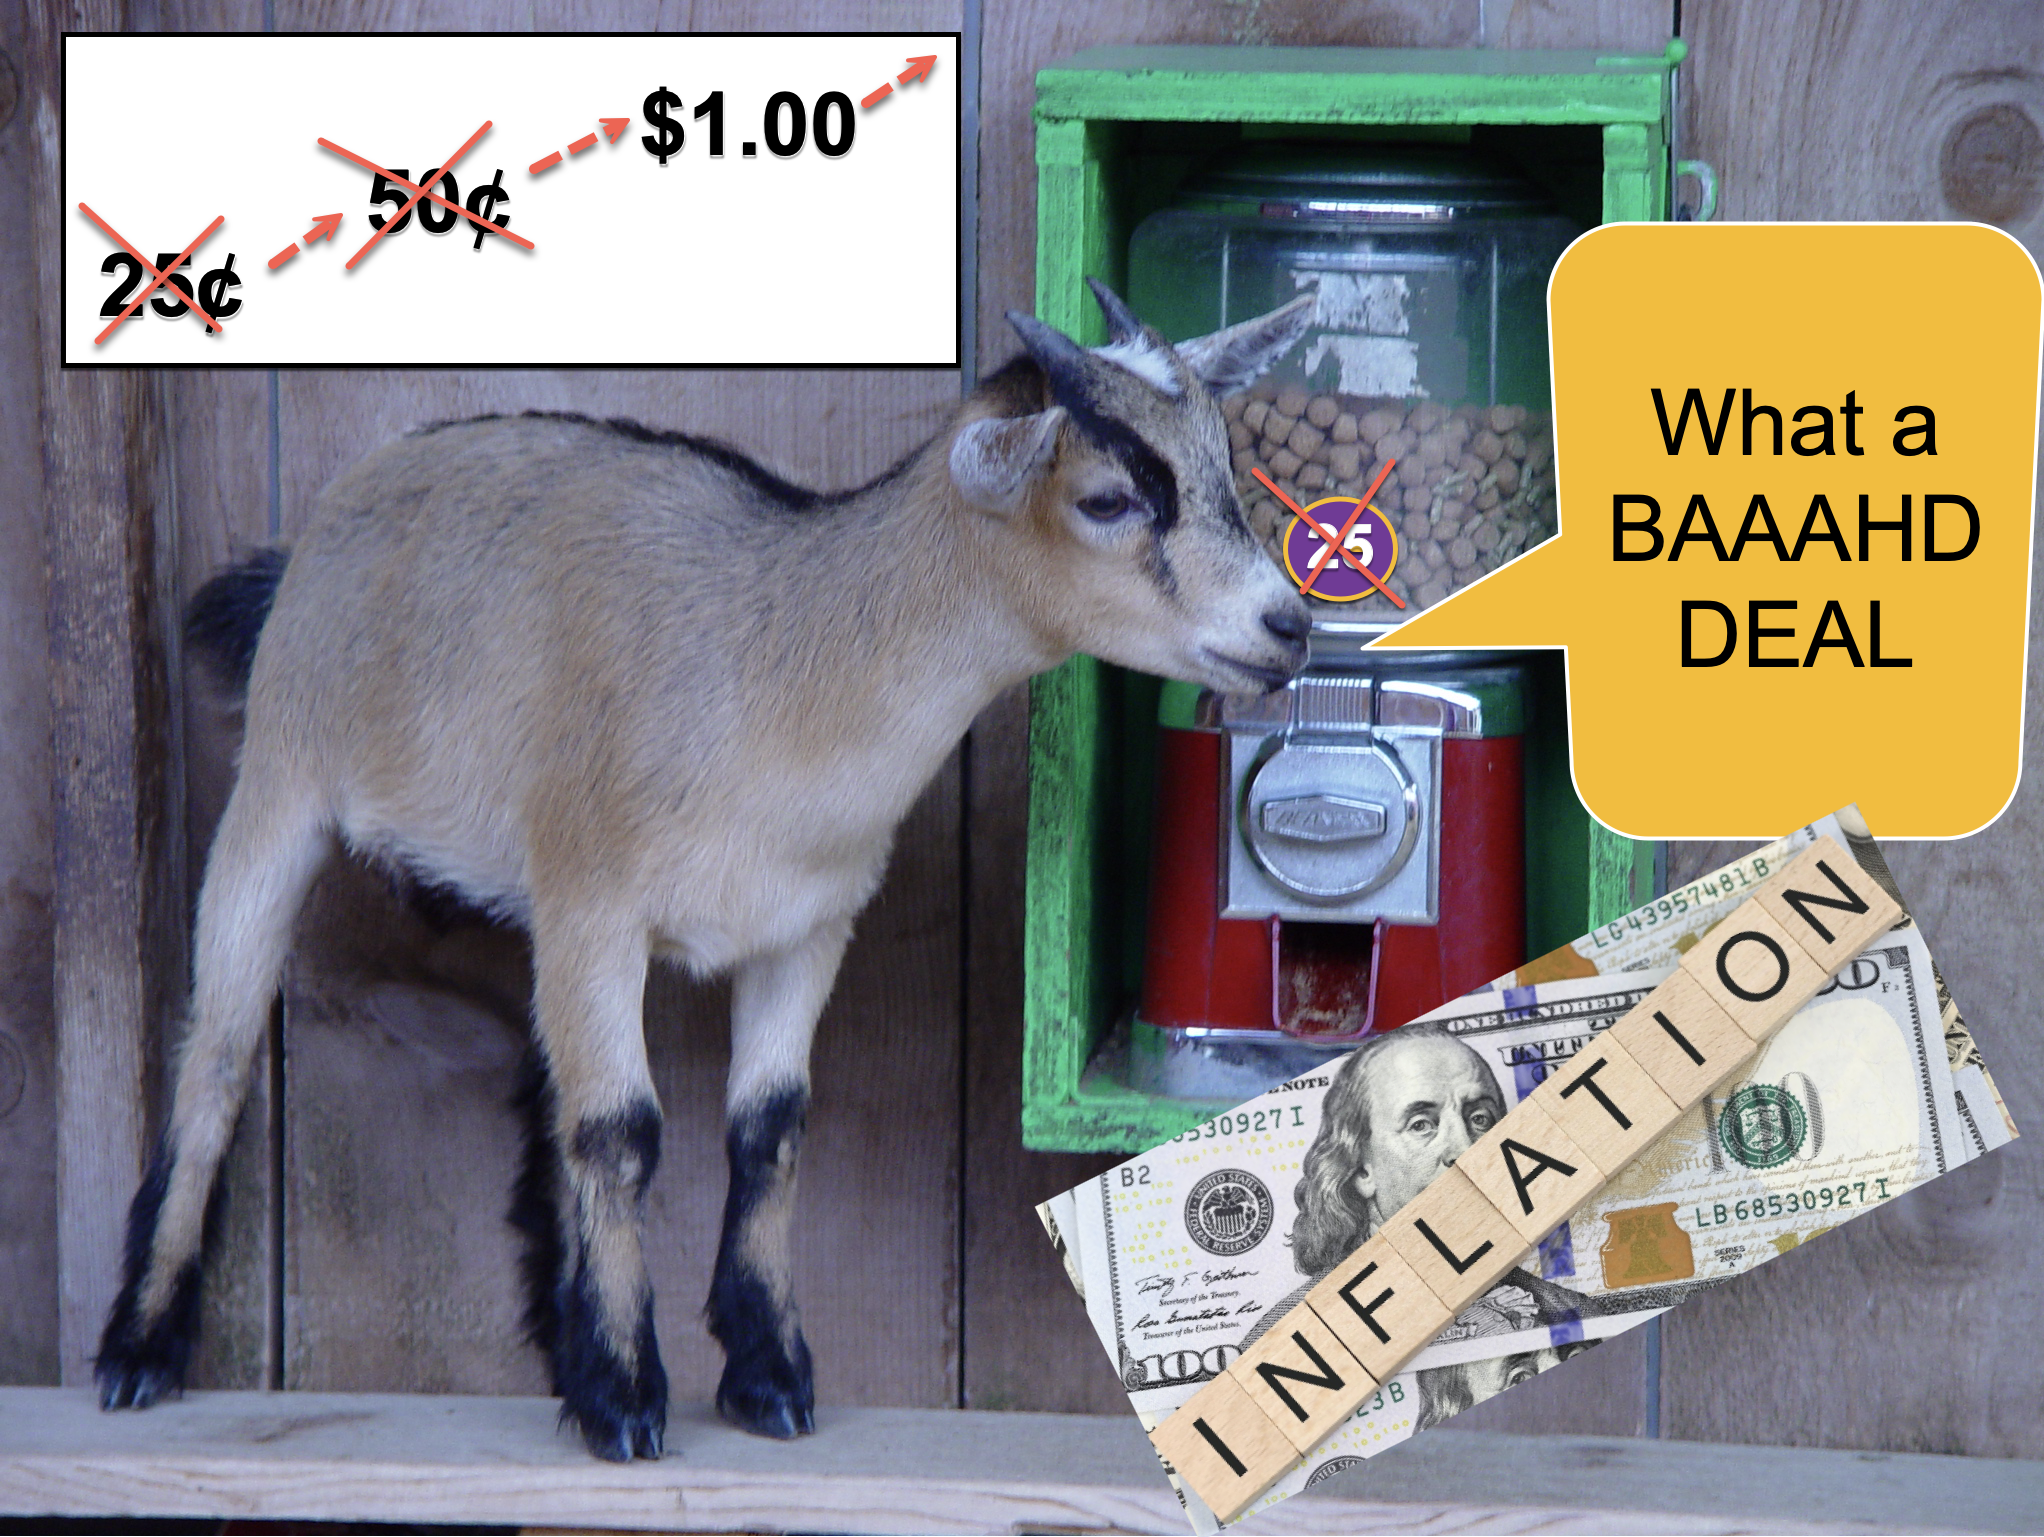 Image of a goat at a food dispenser with the price being inflated from 25¢ to $1.00 called a BAAAHD DEAL Meme